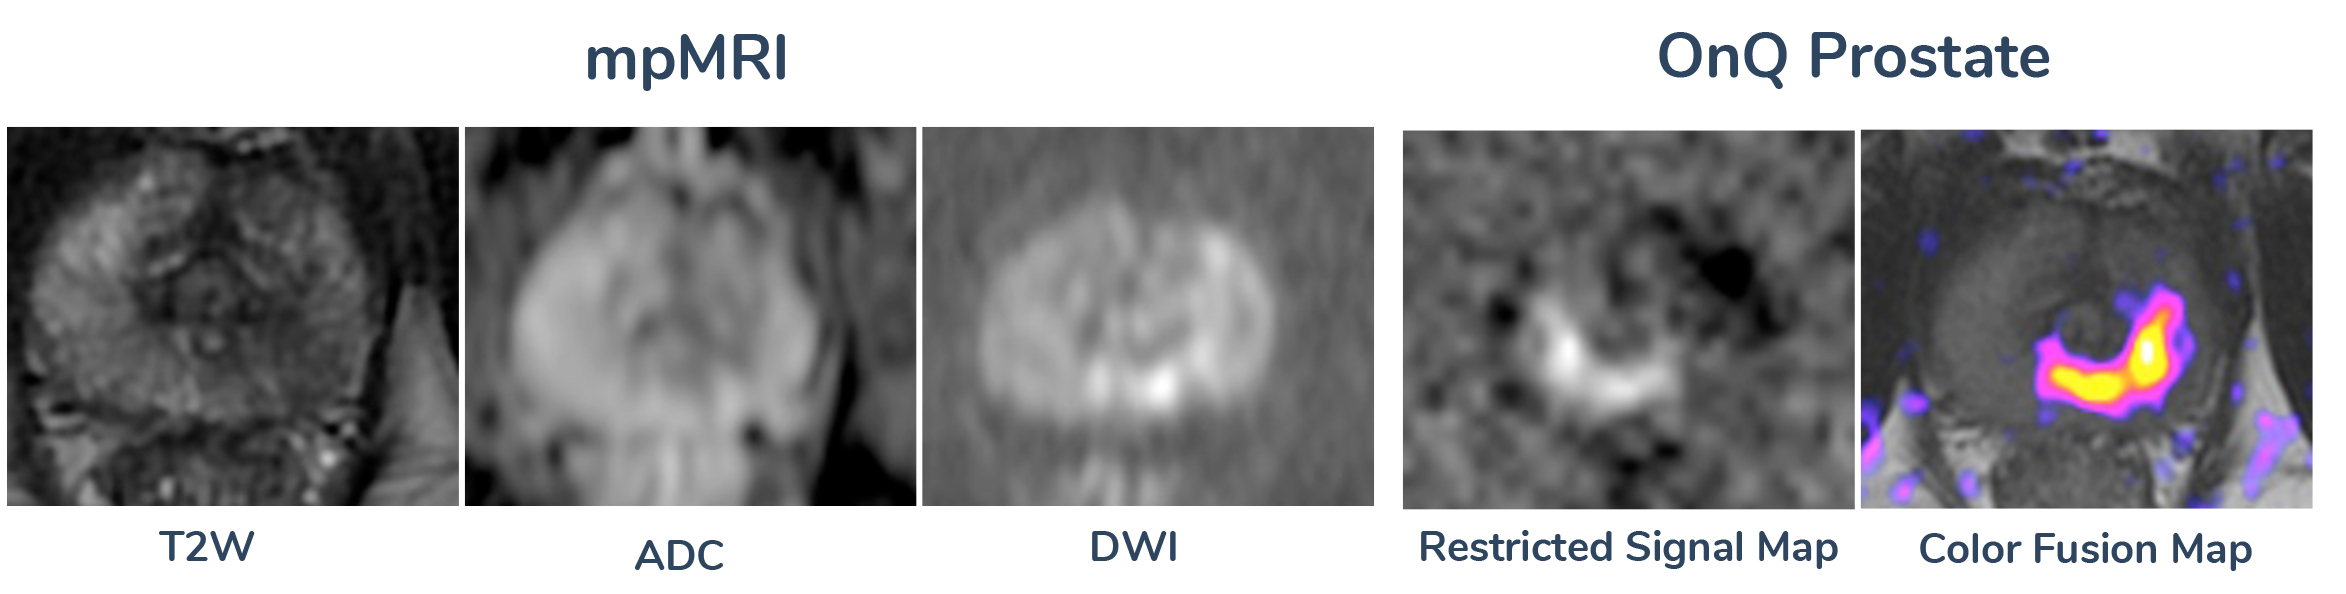 An image comparing mpMRI with OnQ Prostate. mpMRI scans shown are T2W, ADC, and DWI. OnQ Prostate scans shown are restricted signal map and color fusion map.